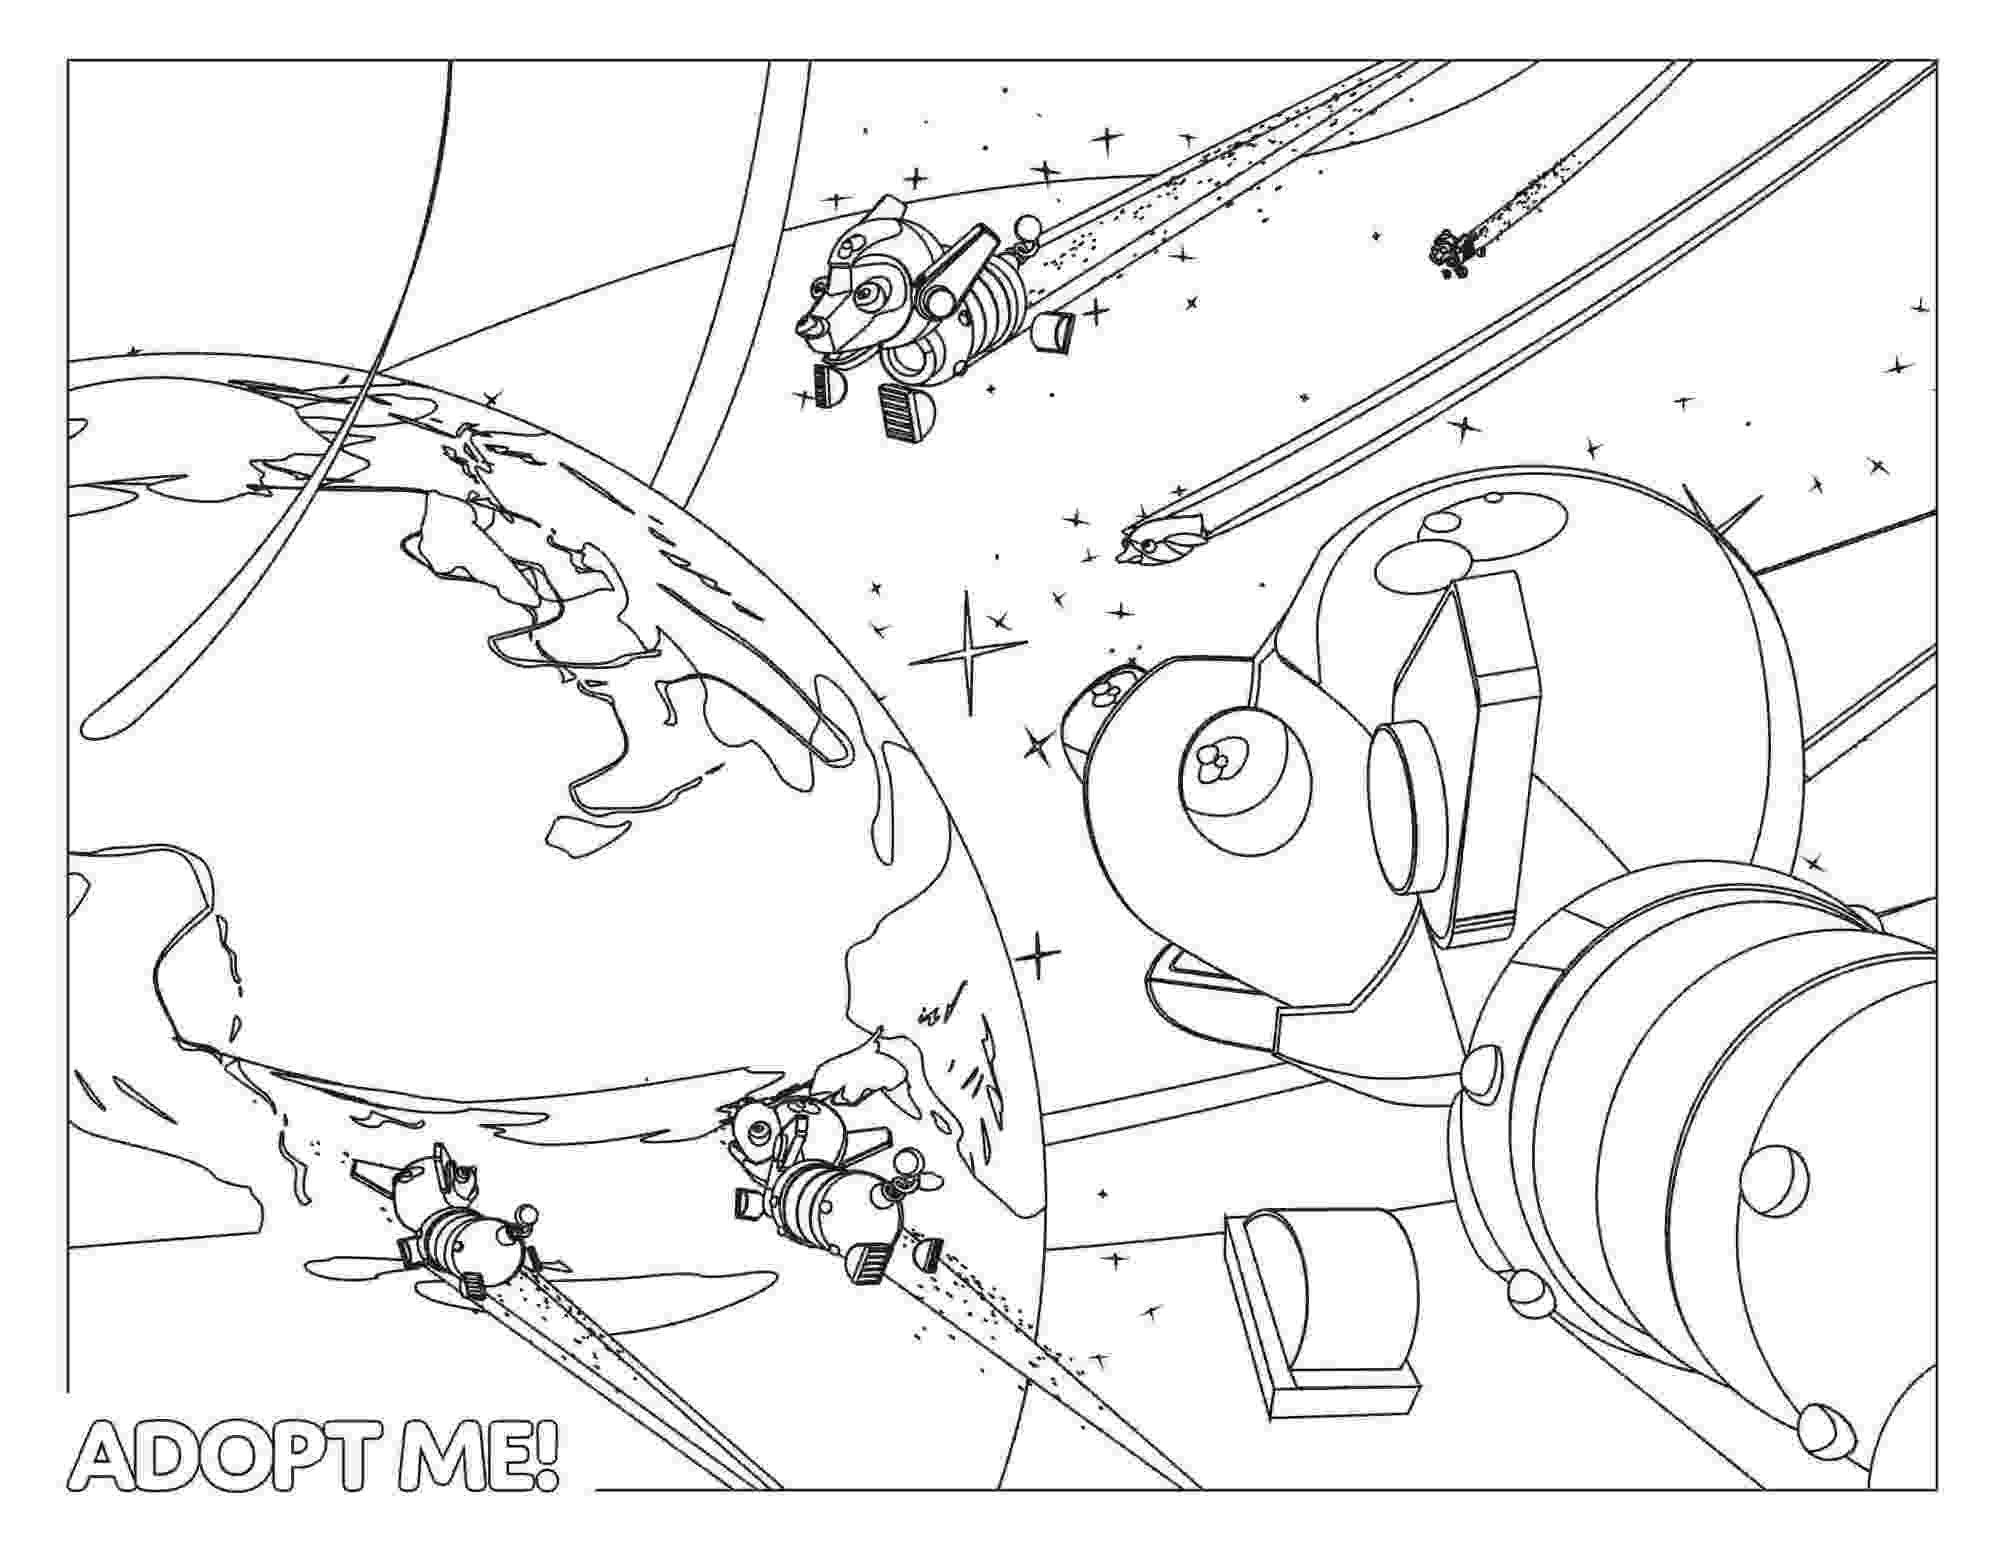 Adopt me Robo Dog became an astronaut in space Coloring Pages - Adopt me Coloring  Pages - Coloring Pages For Kids And Adults